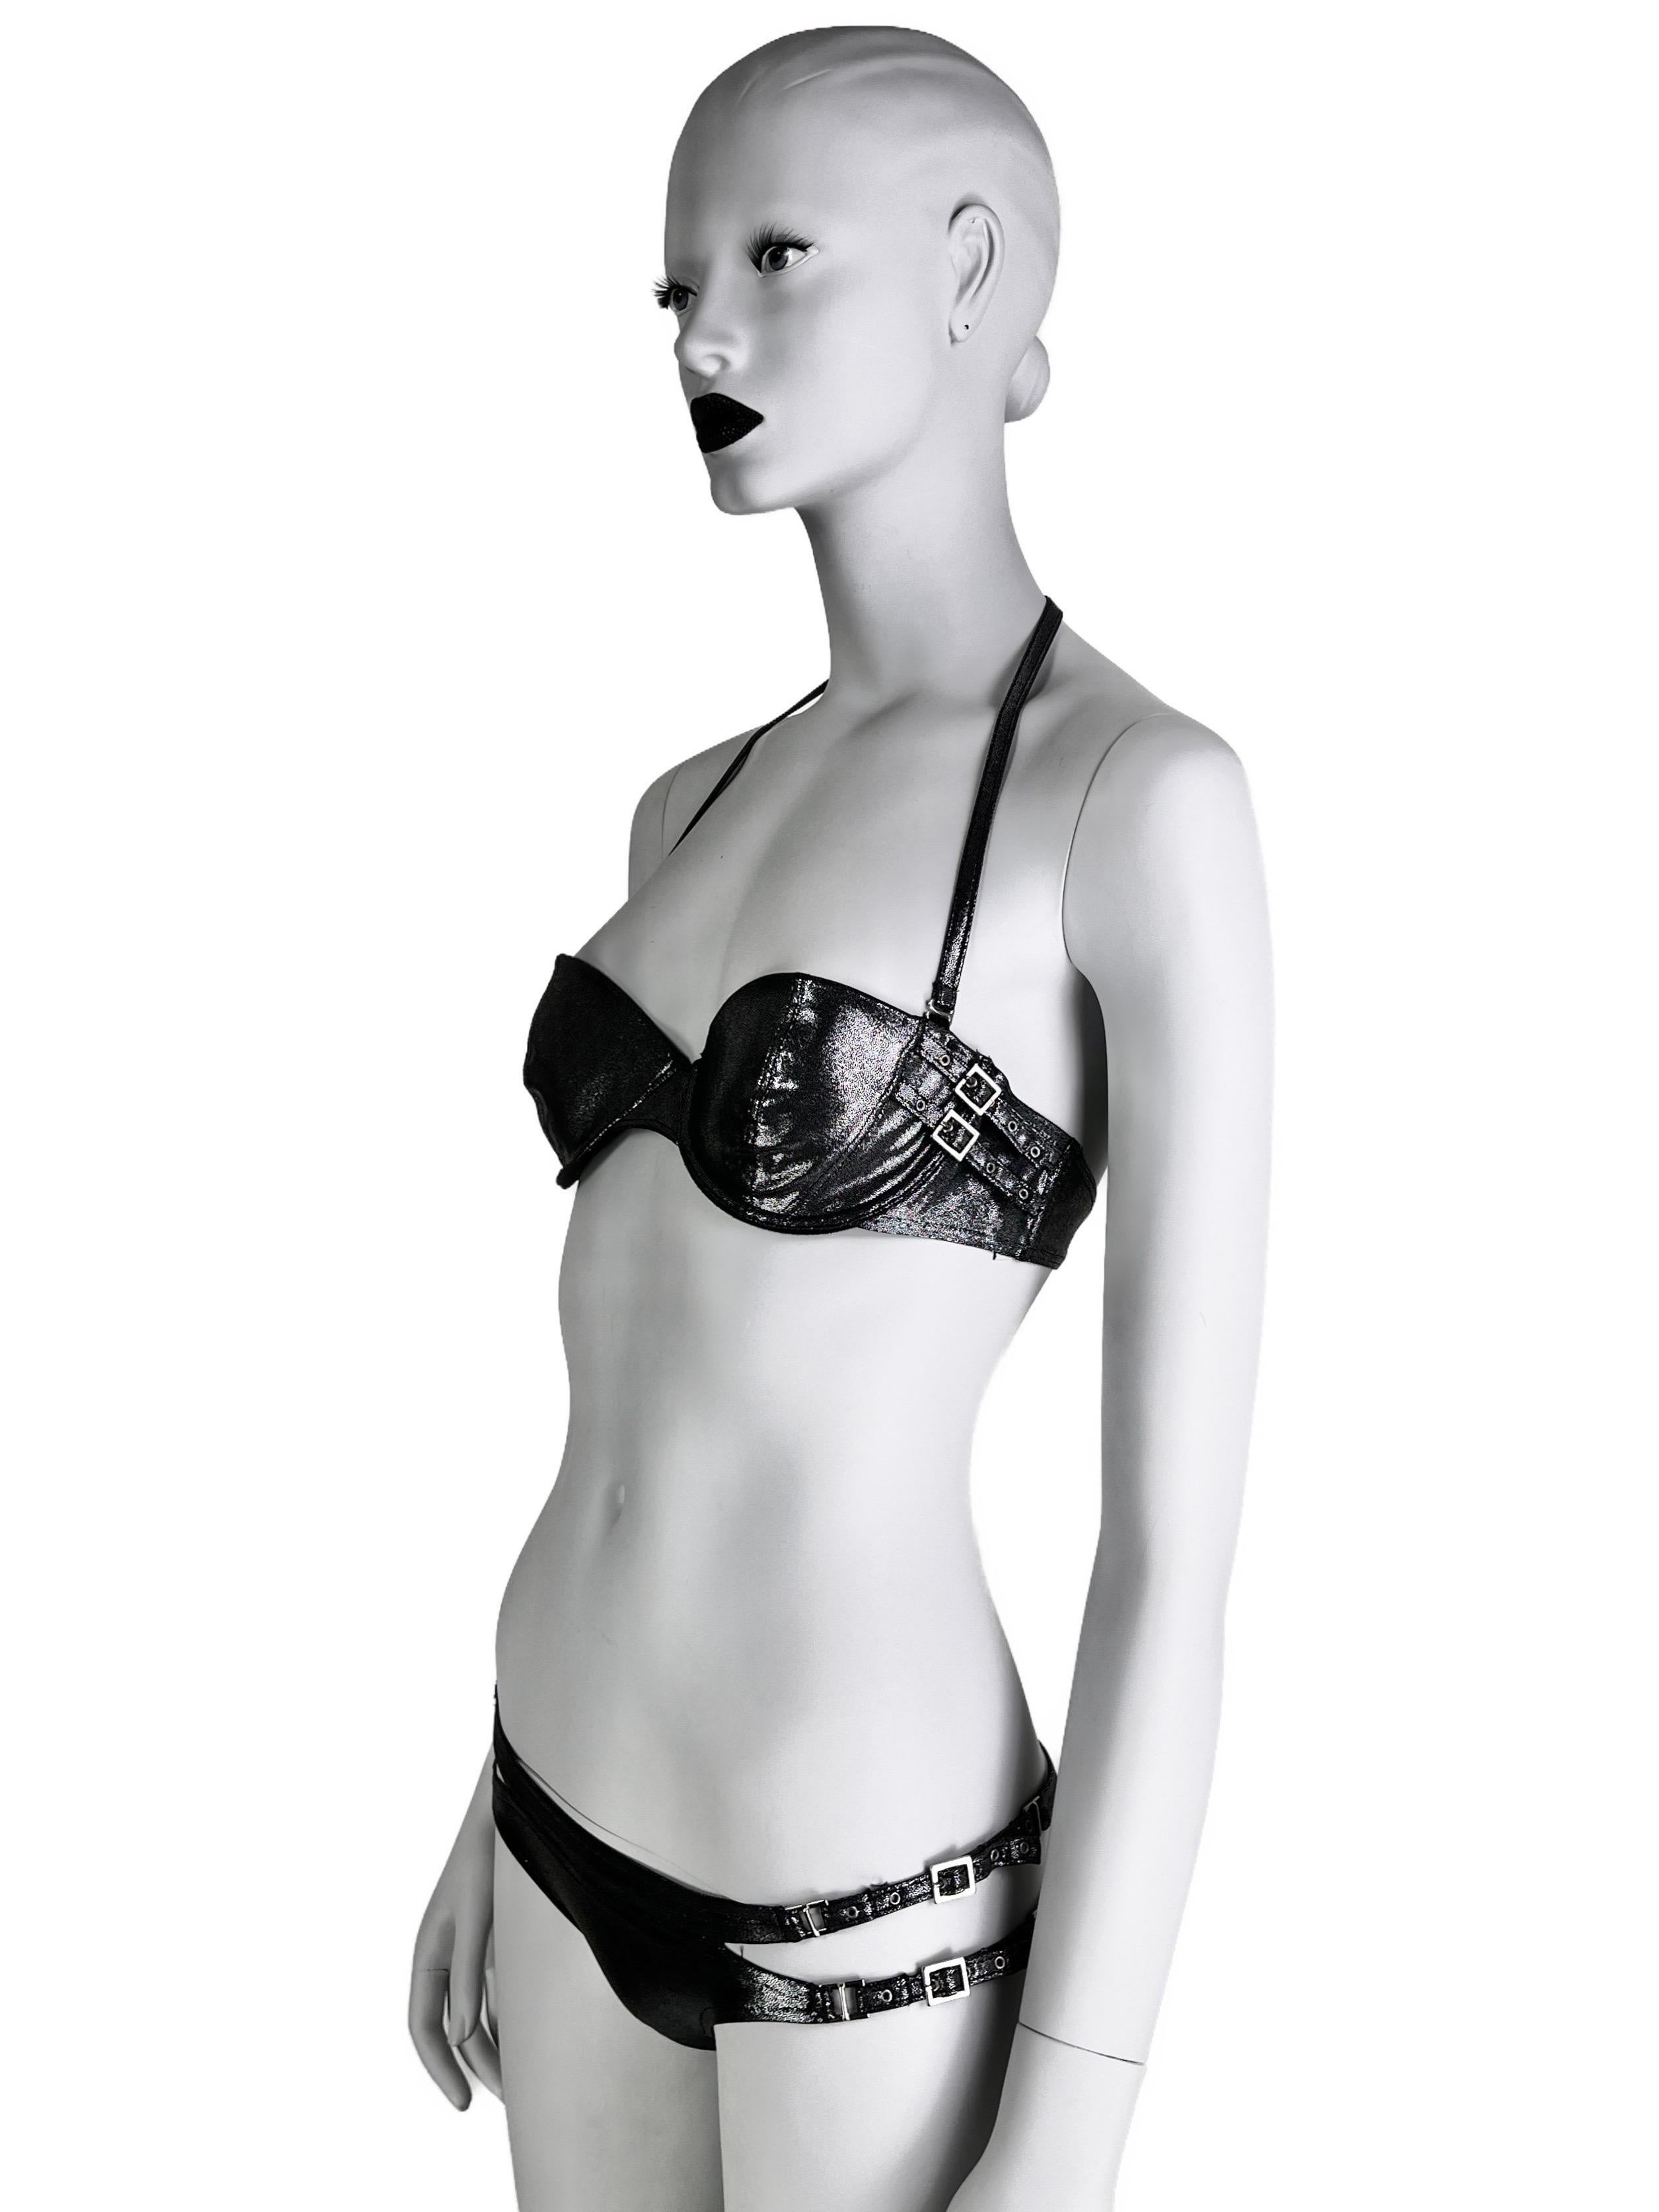 A rare Dior bikini from Spring 2004 season, similar to the ones showed on the runway in a very dark silver shade.

Featuring Dior-stamped straps and sexy cut-outs on the bottom. 

Size 34(75)B for the demi-style bikini top and FR 38 for the bottoms,